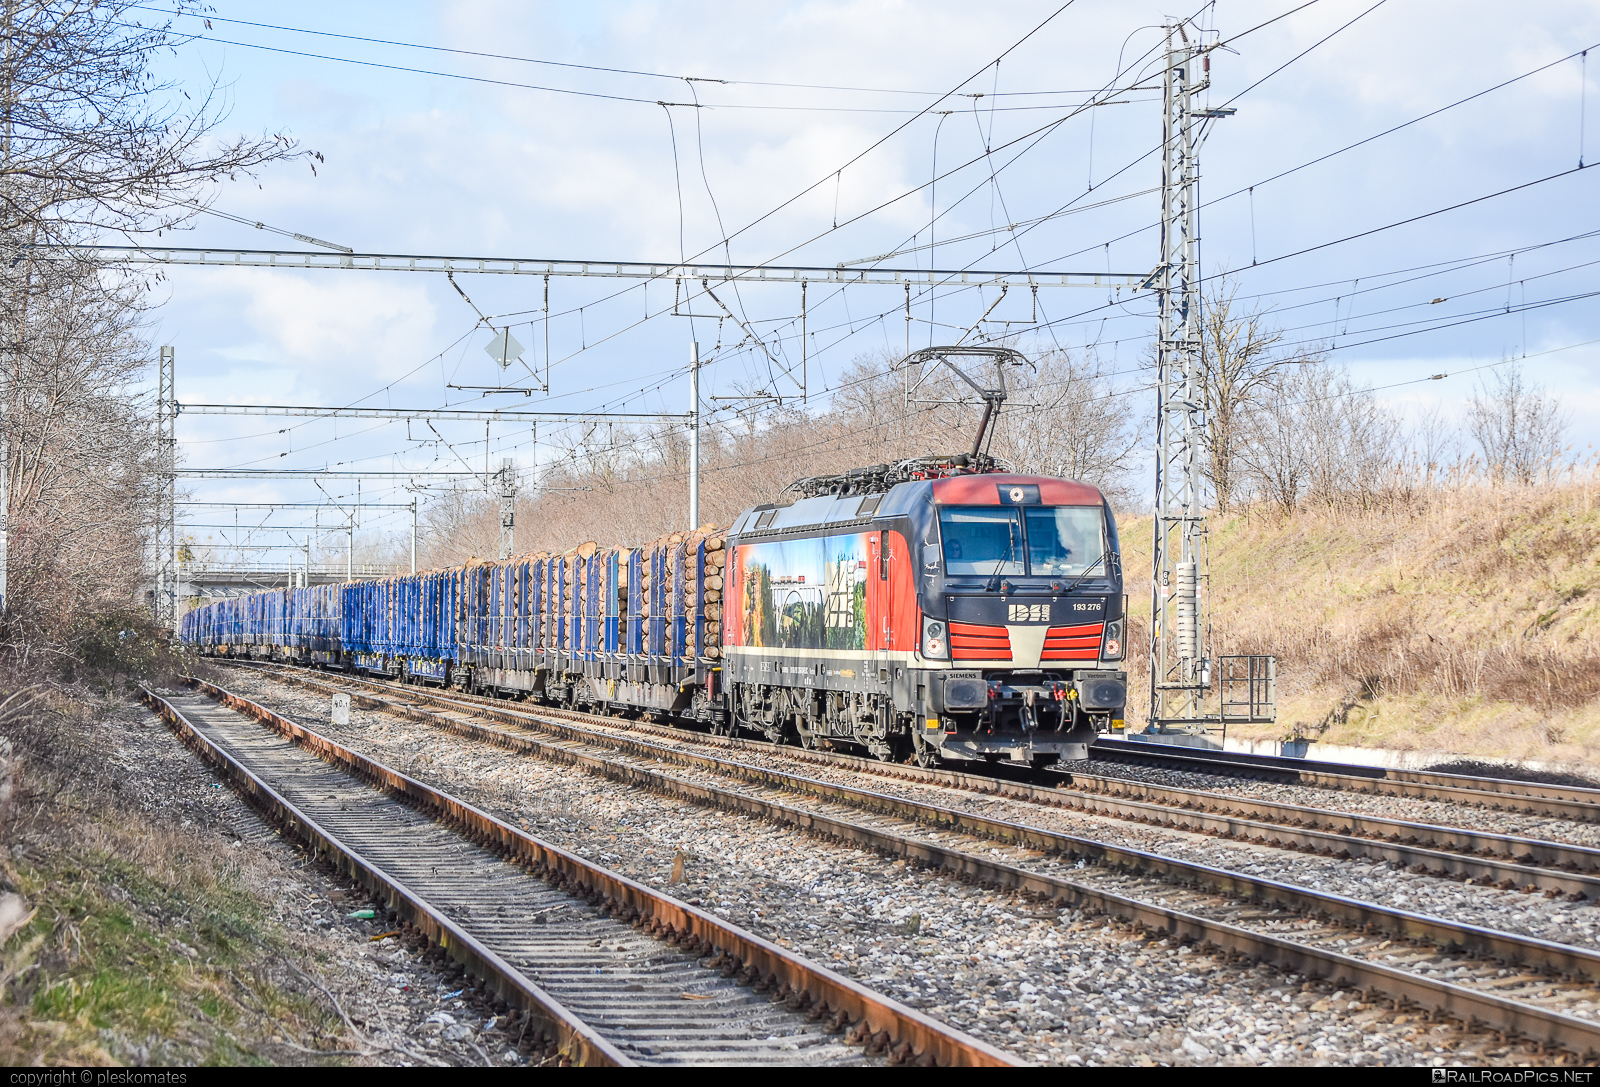 Siemens Vectron MS - 193 276 operated by IDS CARGO a. s. #ell #ellgermany #eloc #europeanlocomotiveleasing #idsc #idscargo #siemens #siemensVectron #siemensVectronMS #vectron #vectronMS #wood